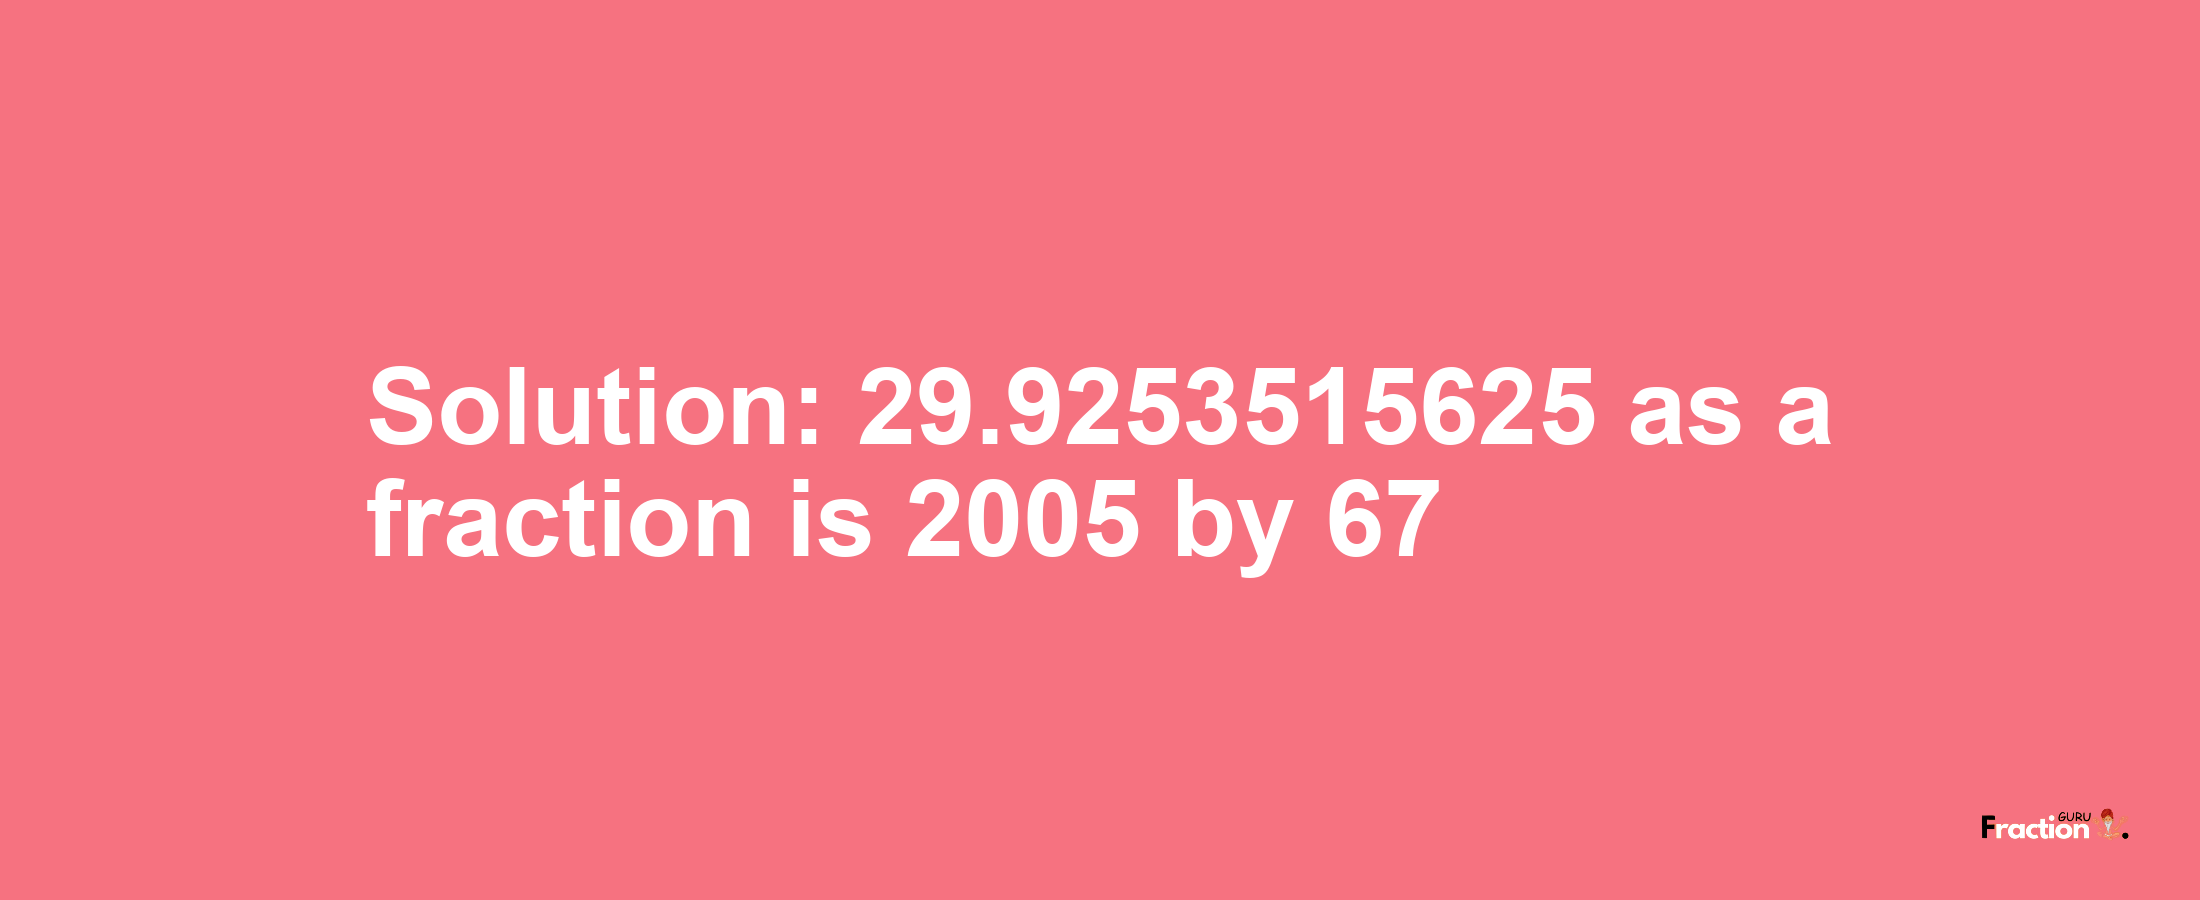 Solution:29.9253515625 as a fraction is 2005/67